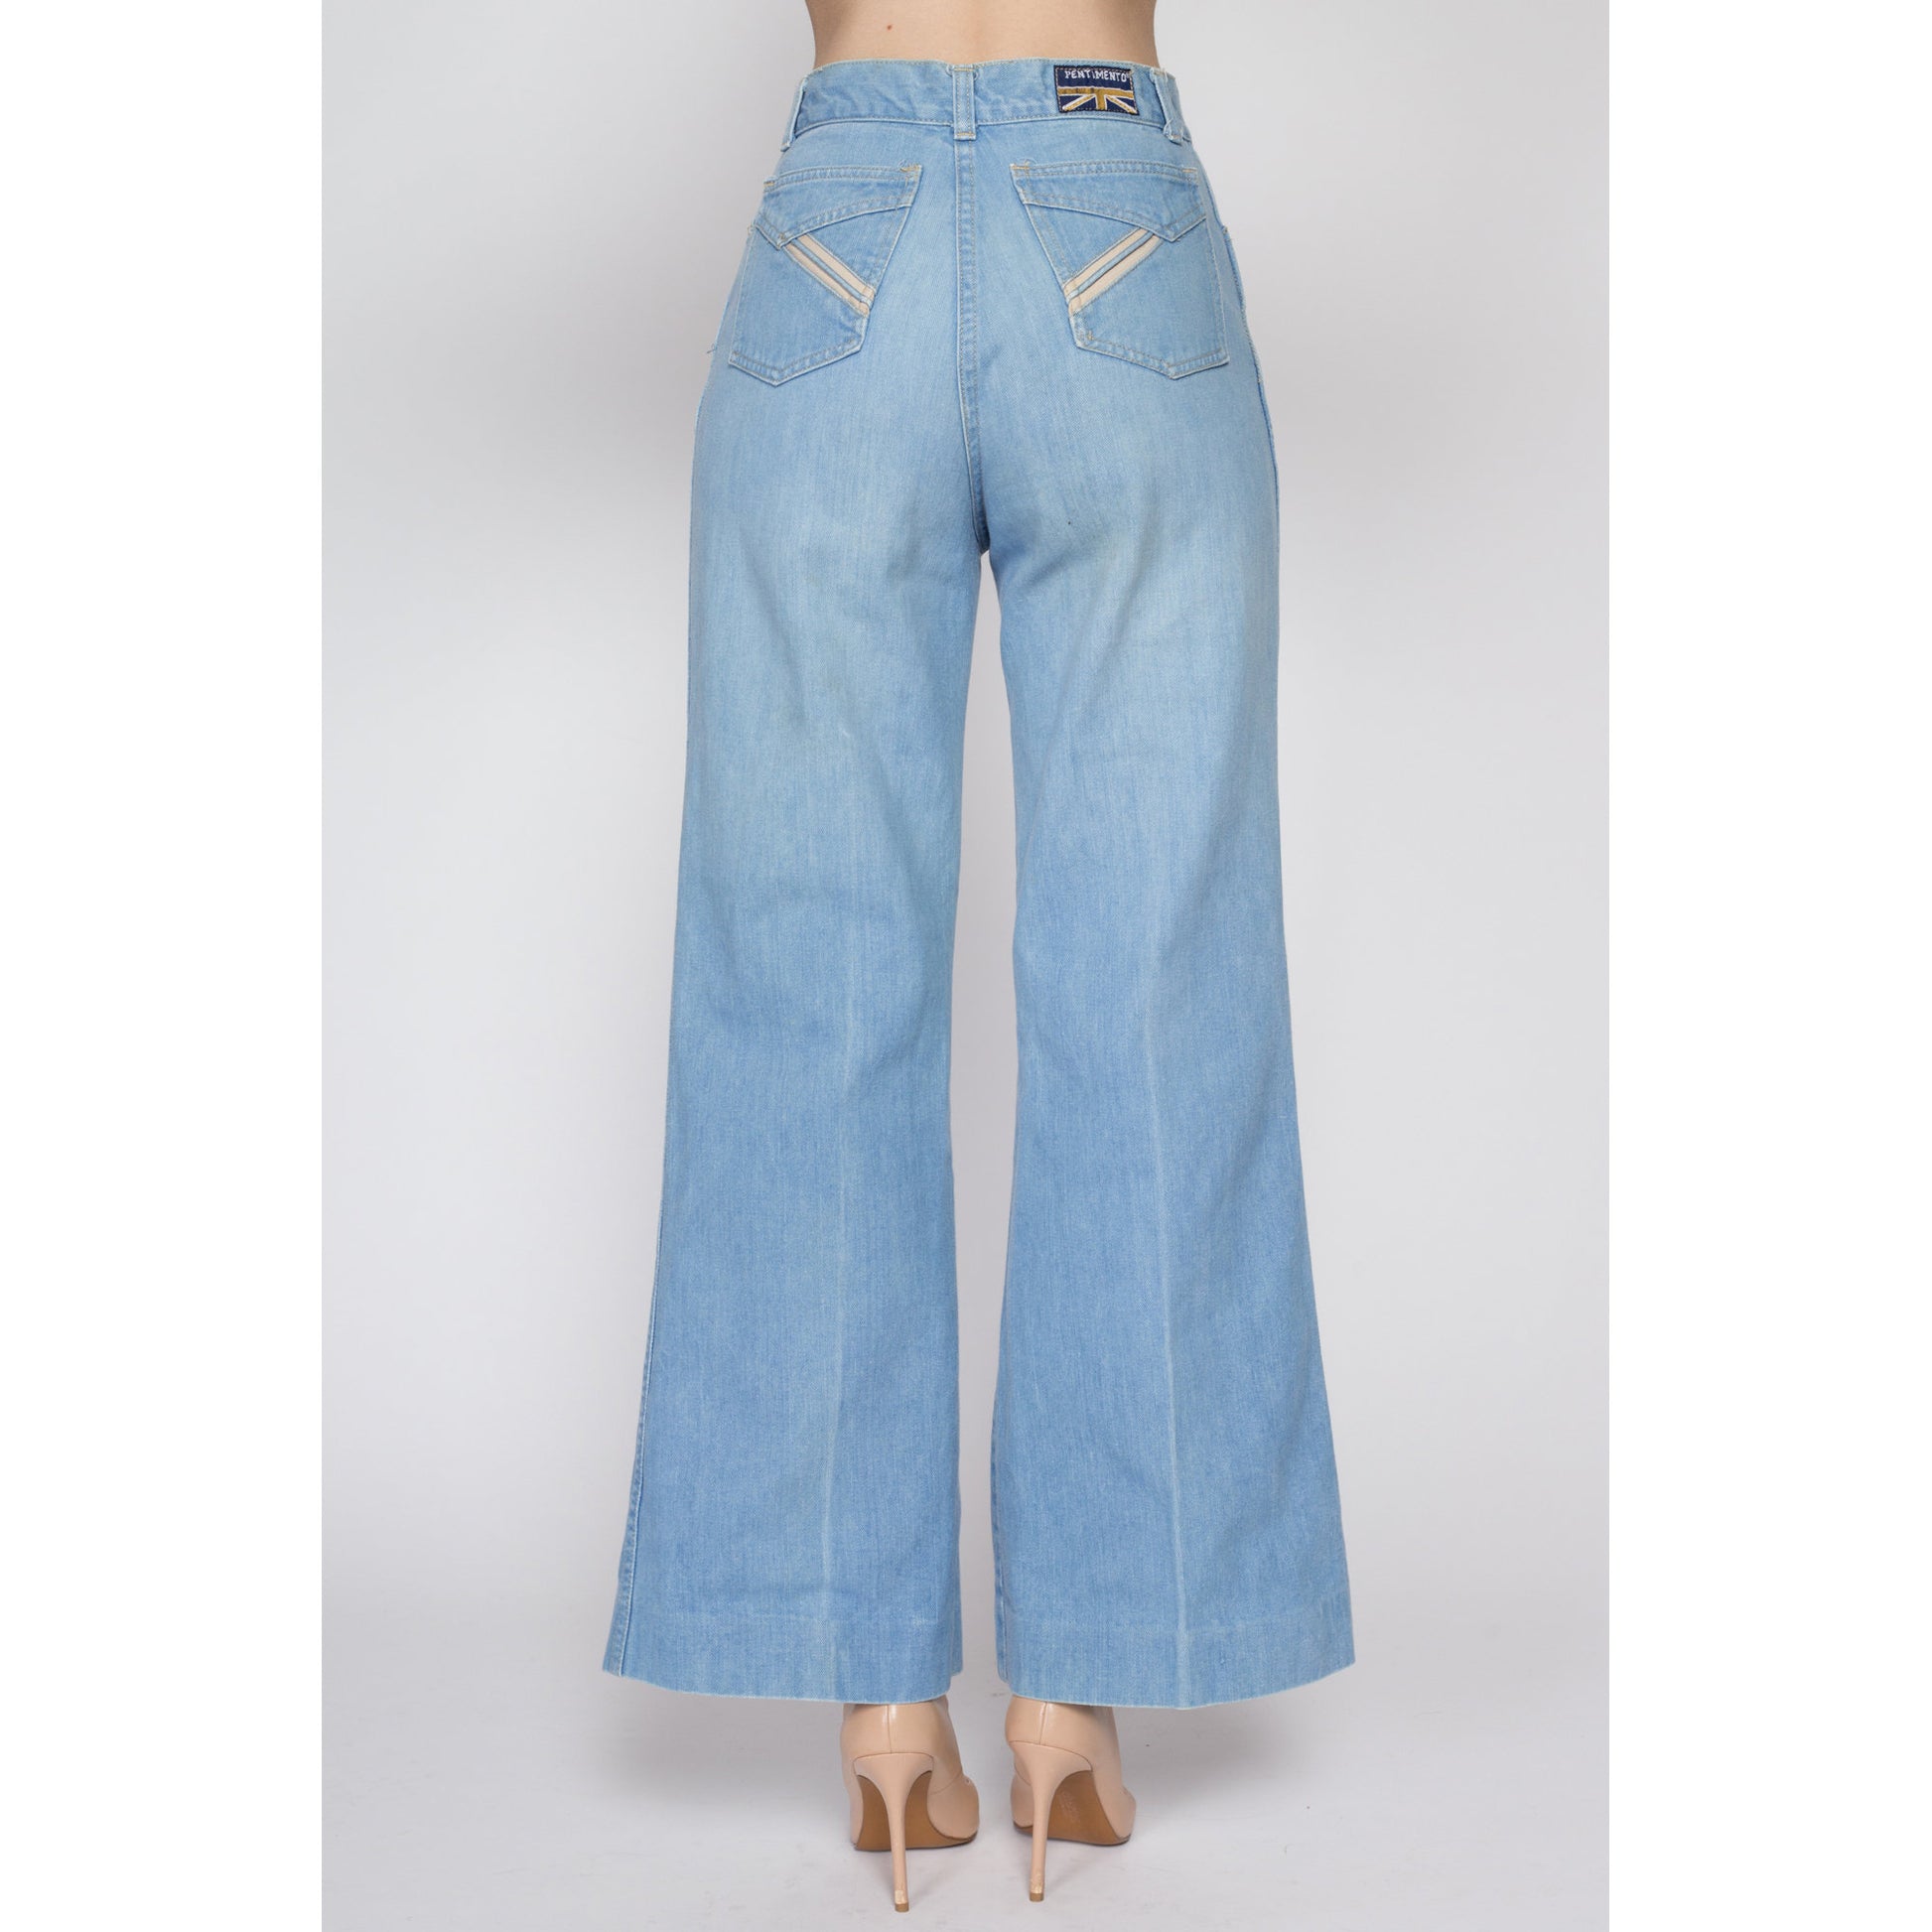 Small 70s High Waisted Light Wash Flared Jeans 26 – Flying Apple